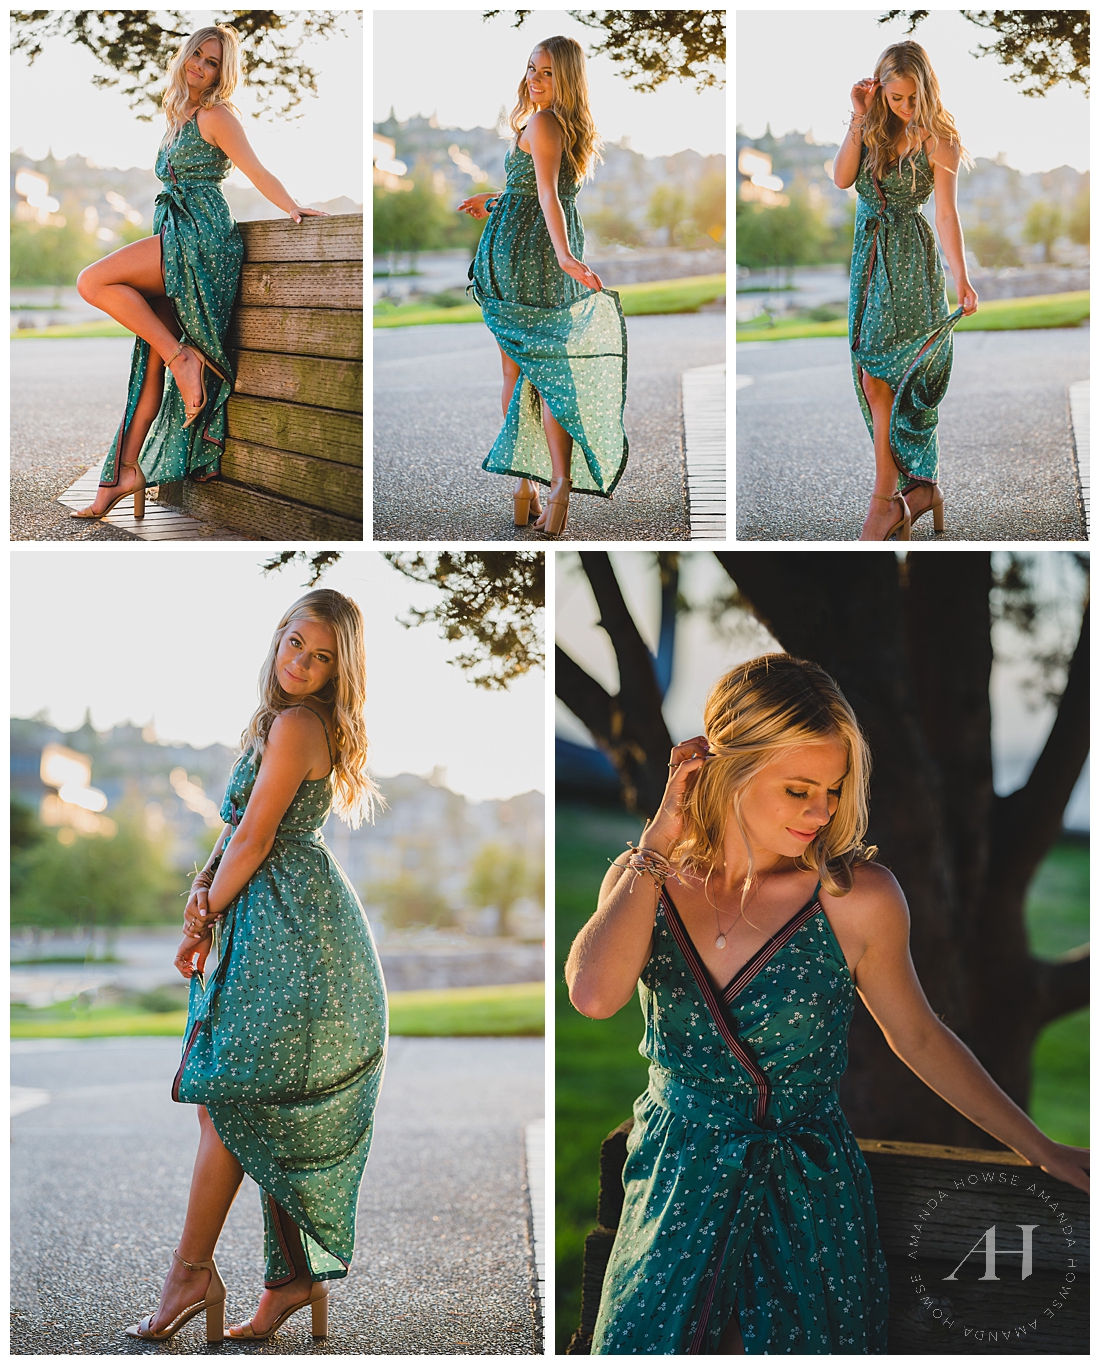 Windy Senior Session | What to Wear Guide For Senior Girls, Cute Pose Ideas | Photographed by the Best Tacoma Senior Photographer Amanda Howse Photography